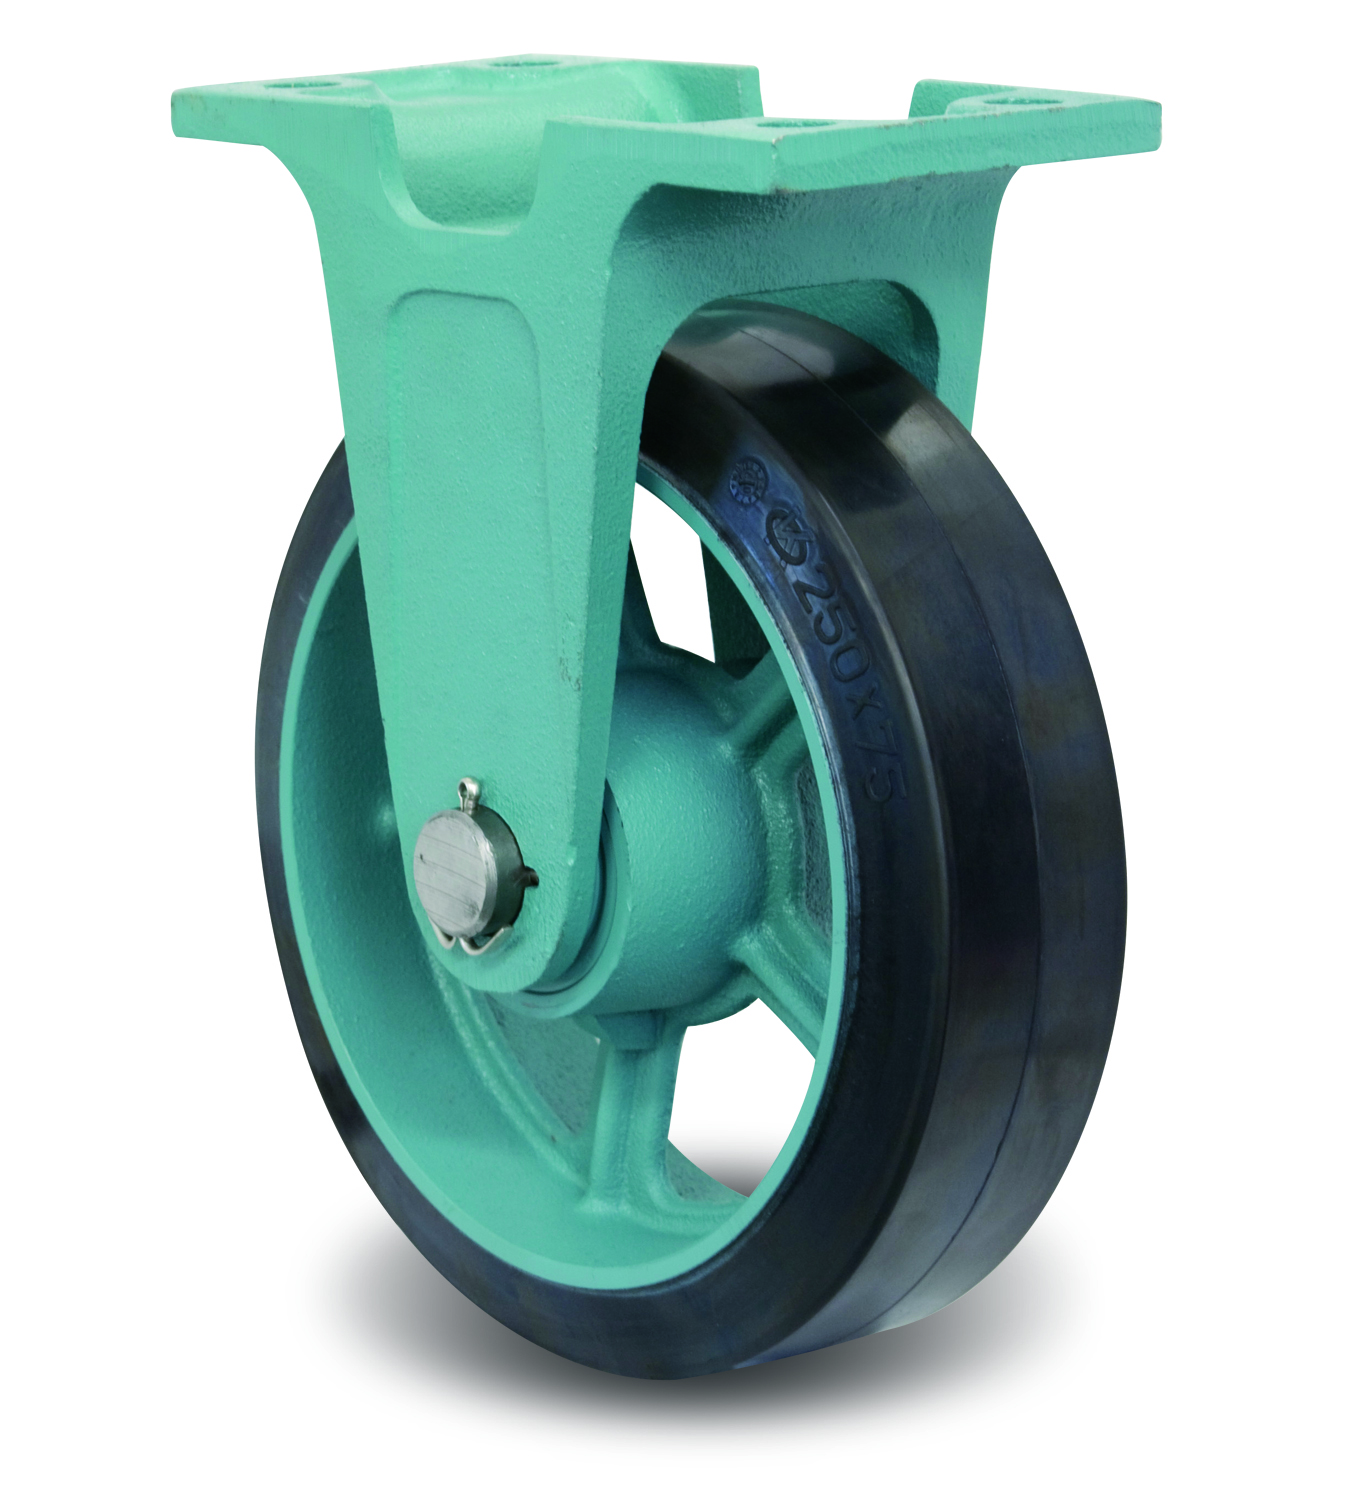 Ductile Caster Wide Type, Fixed MG-W Metal Fittings, E-MG-W (EMG-W100X50) 